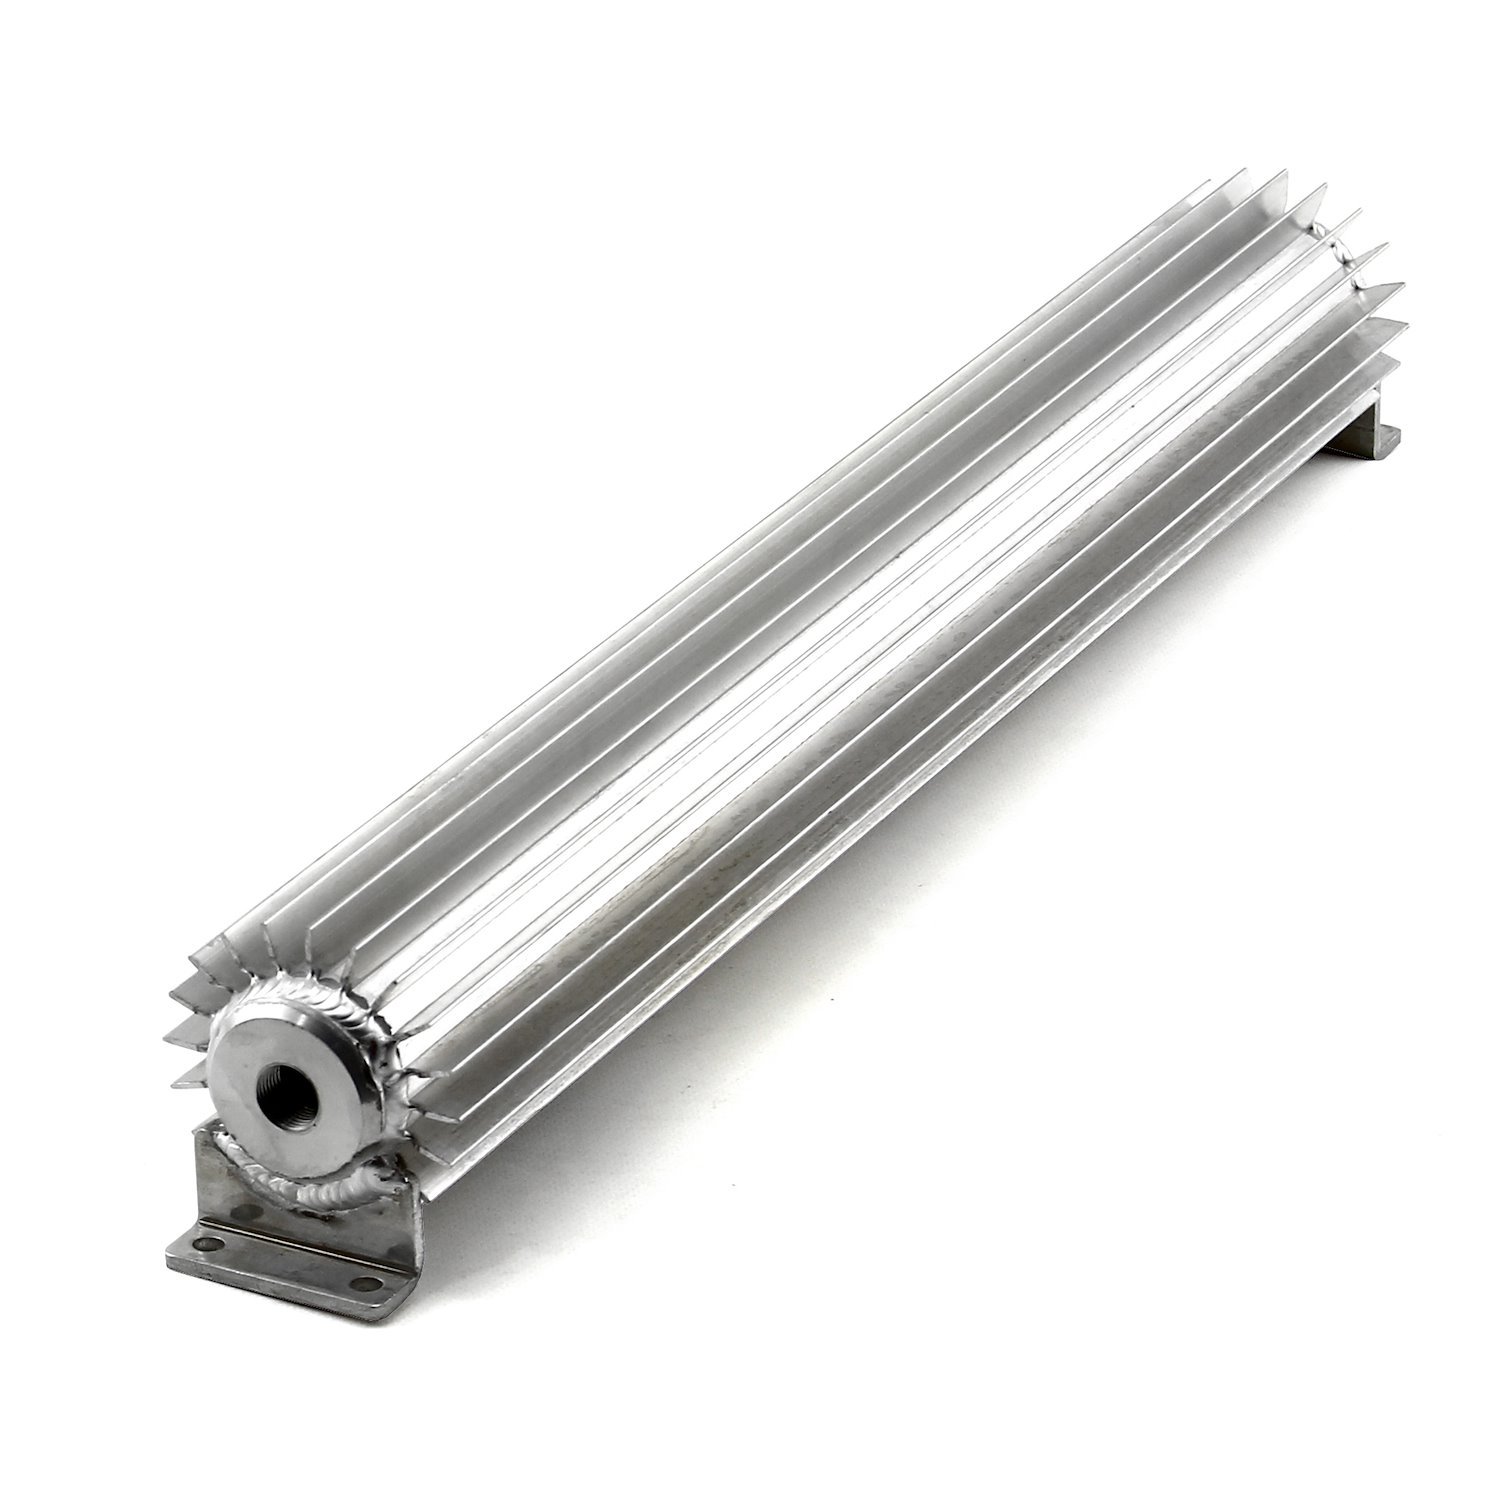 Single Pass Transmission Oil Cooler With 3/8" Hose Barb Fittings Overall: 3" H x 3.25" T x 22" W